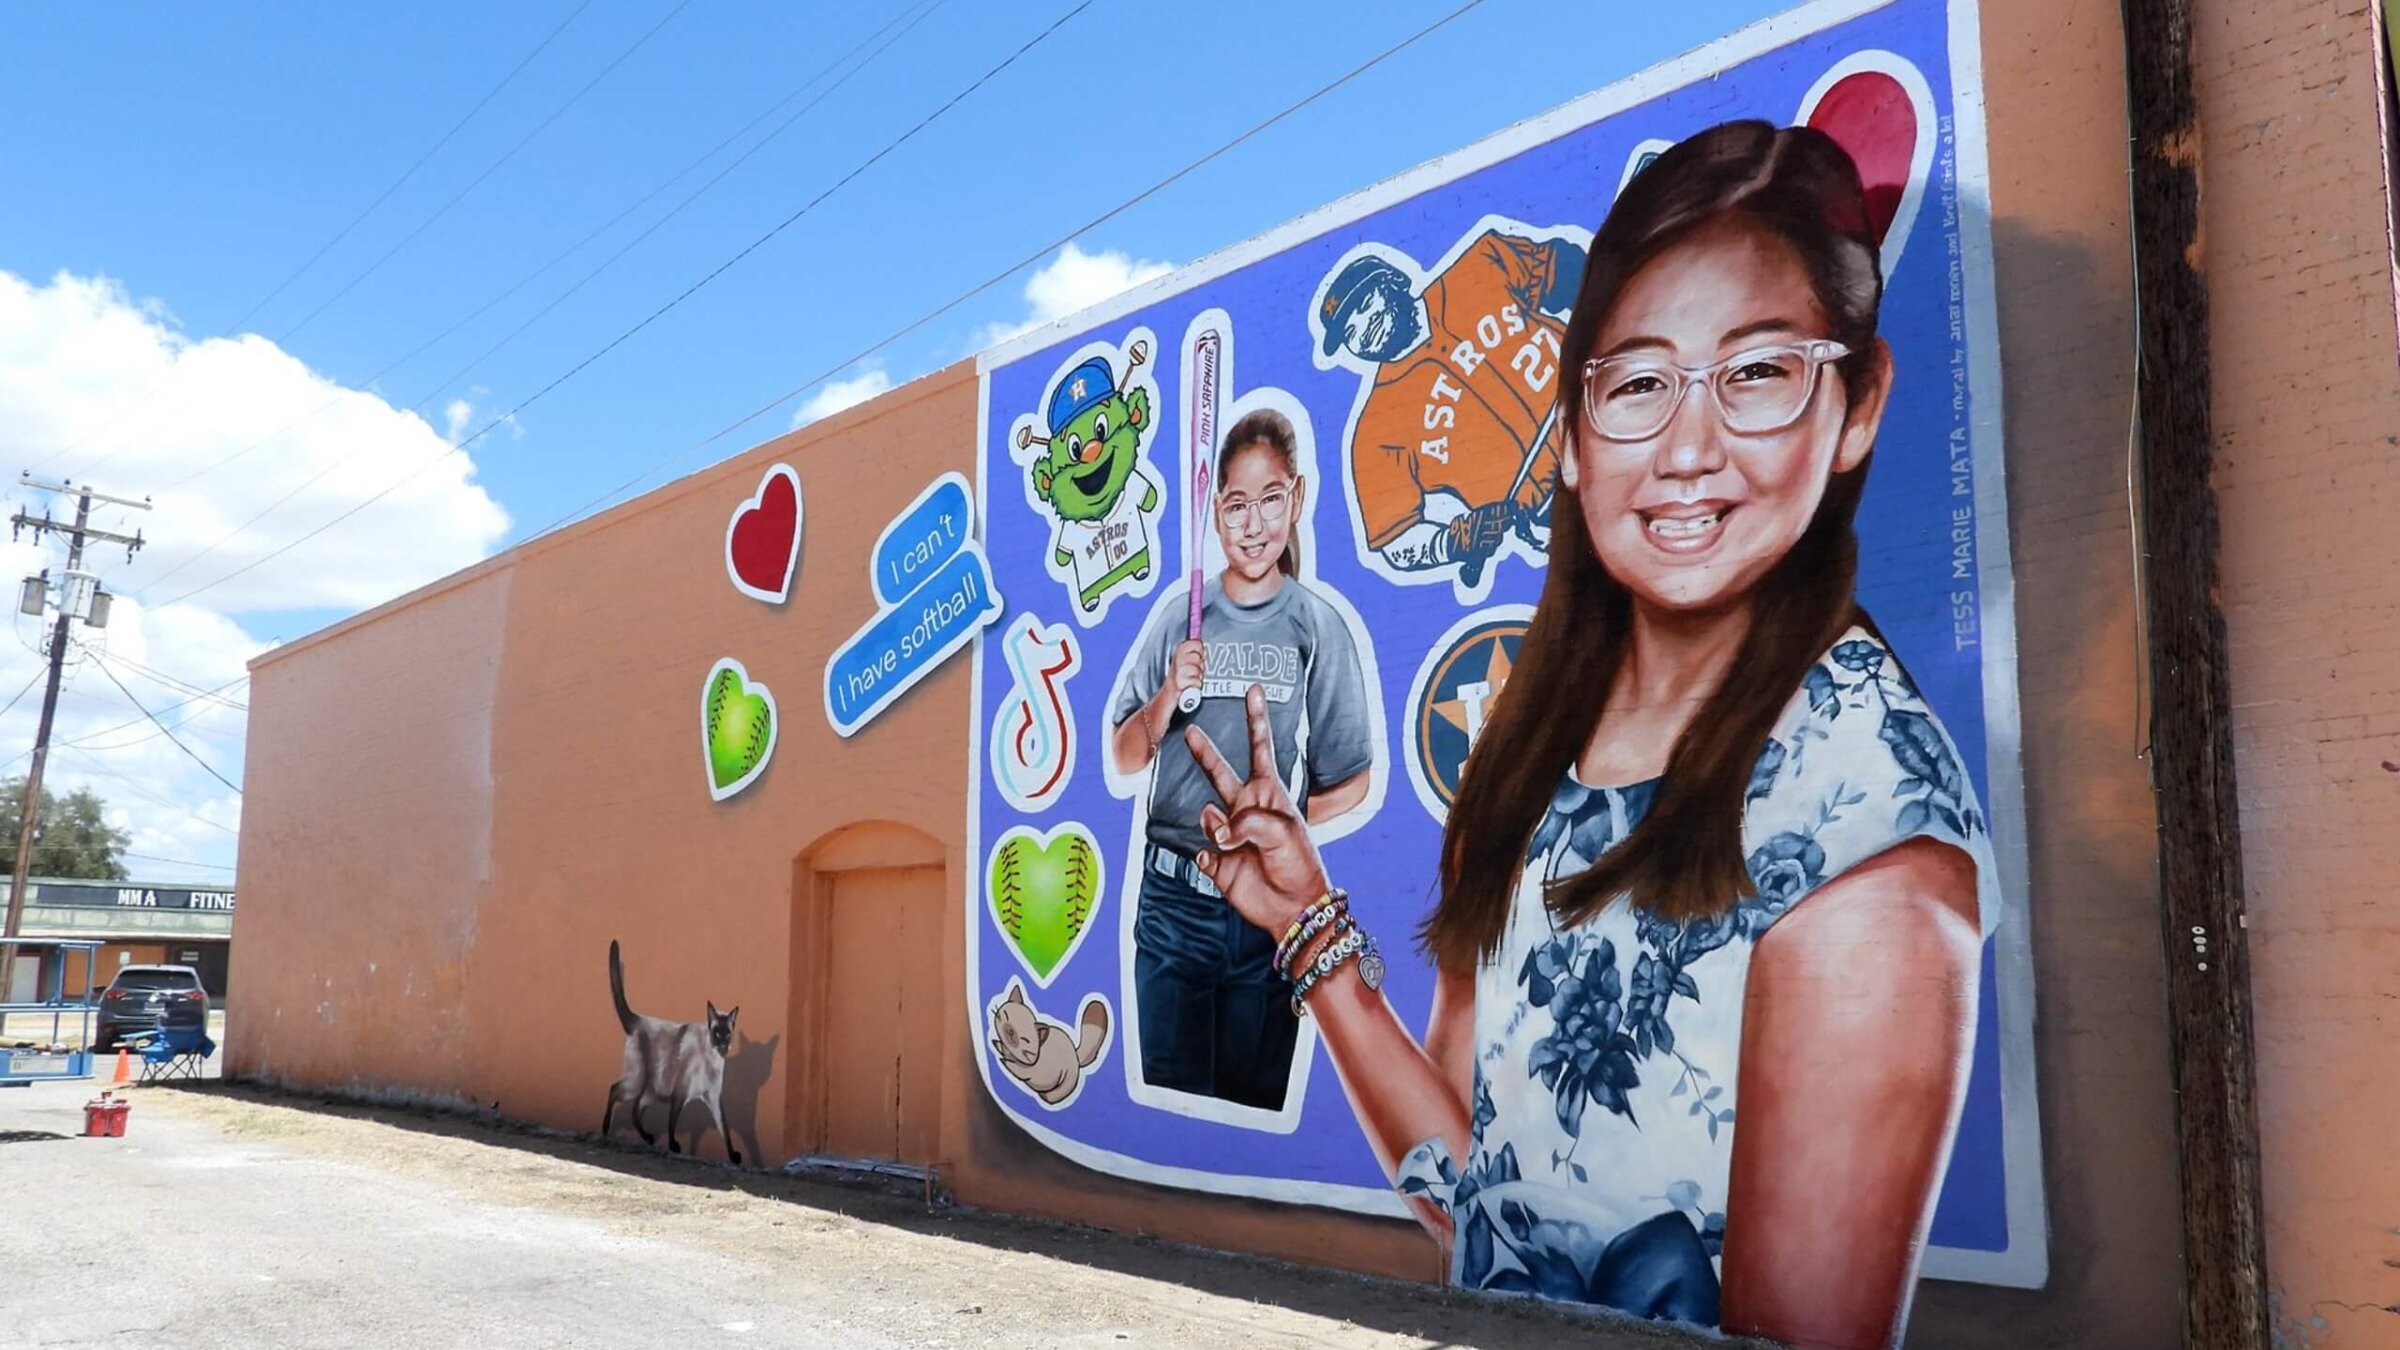 A mural painted by Anat Ronen in memory of Tess Mata in Uvalde, Texas.